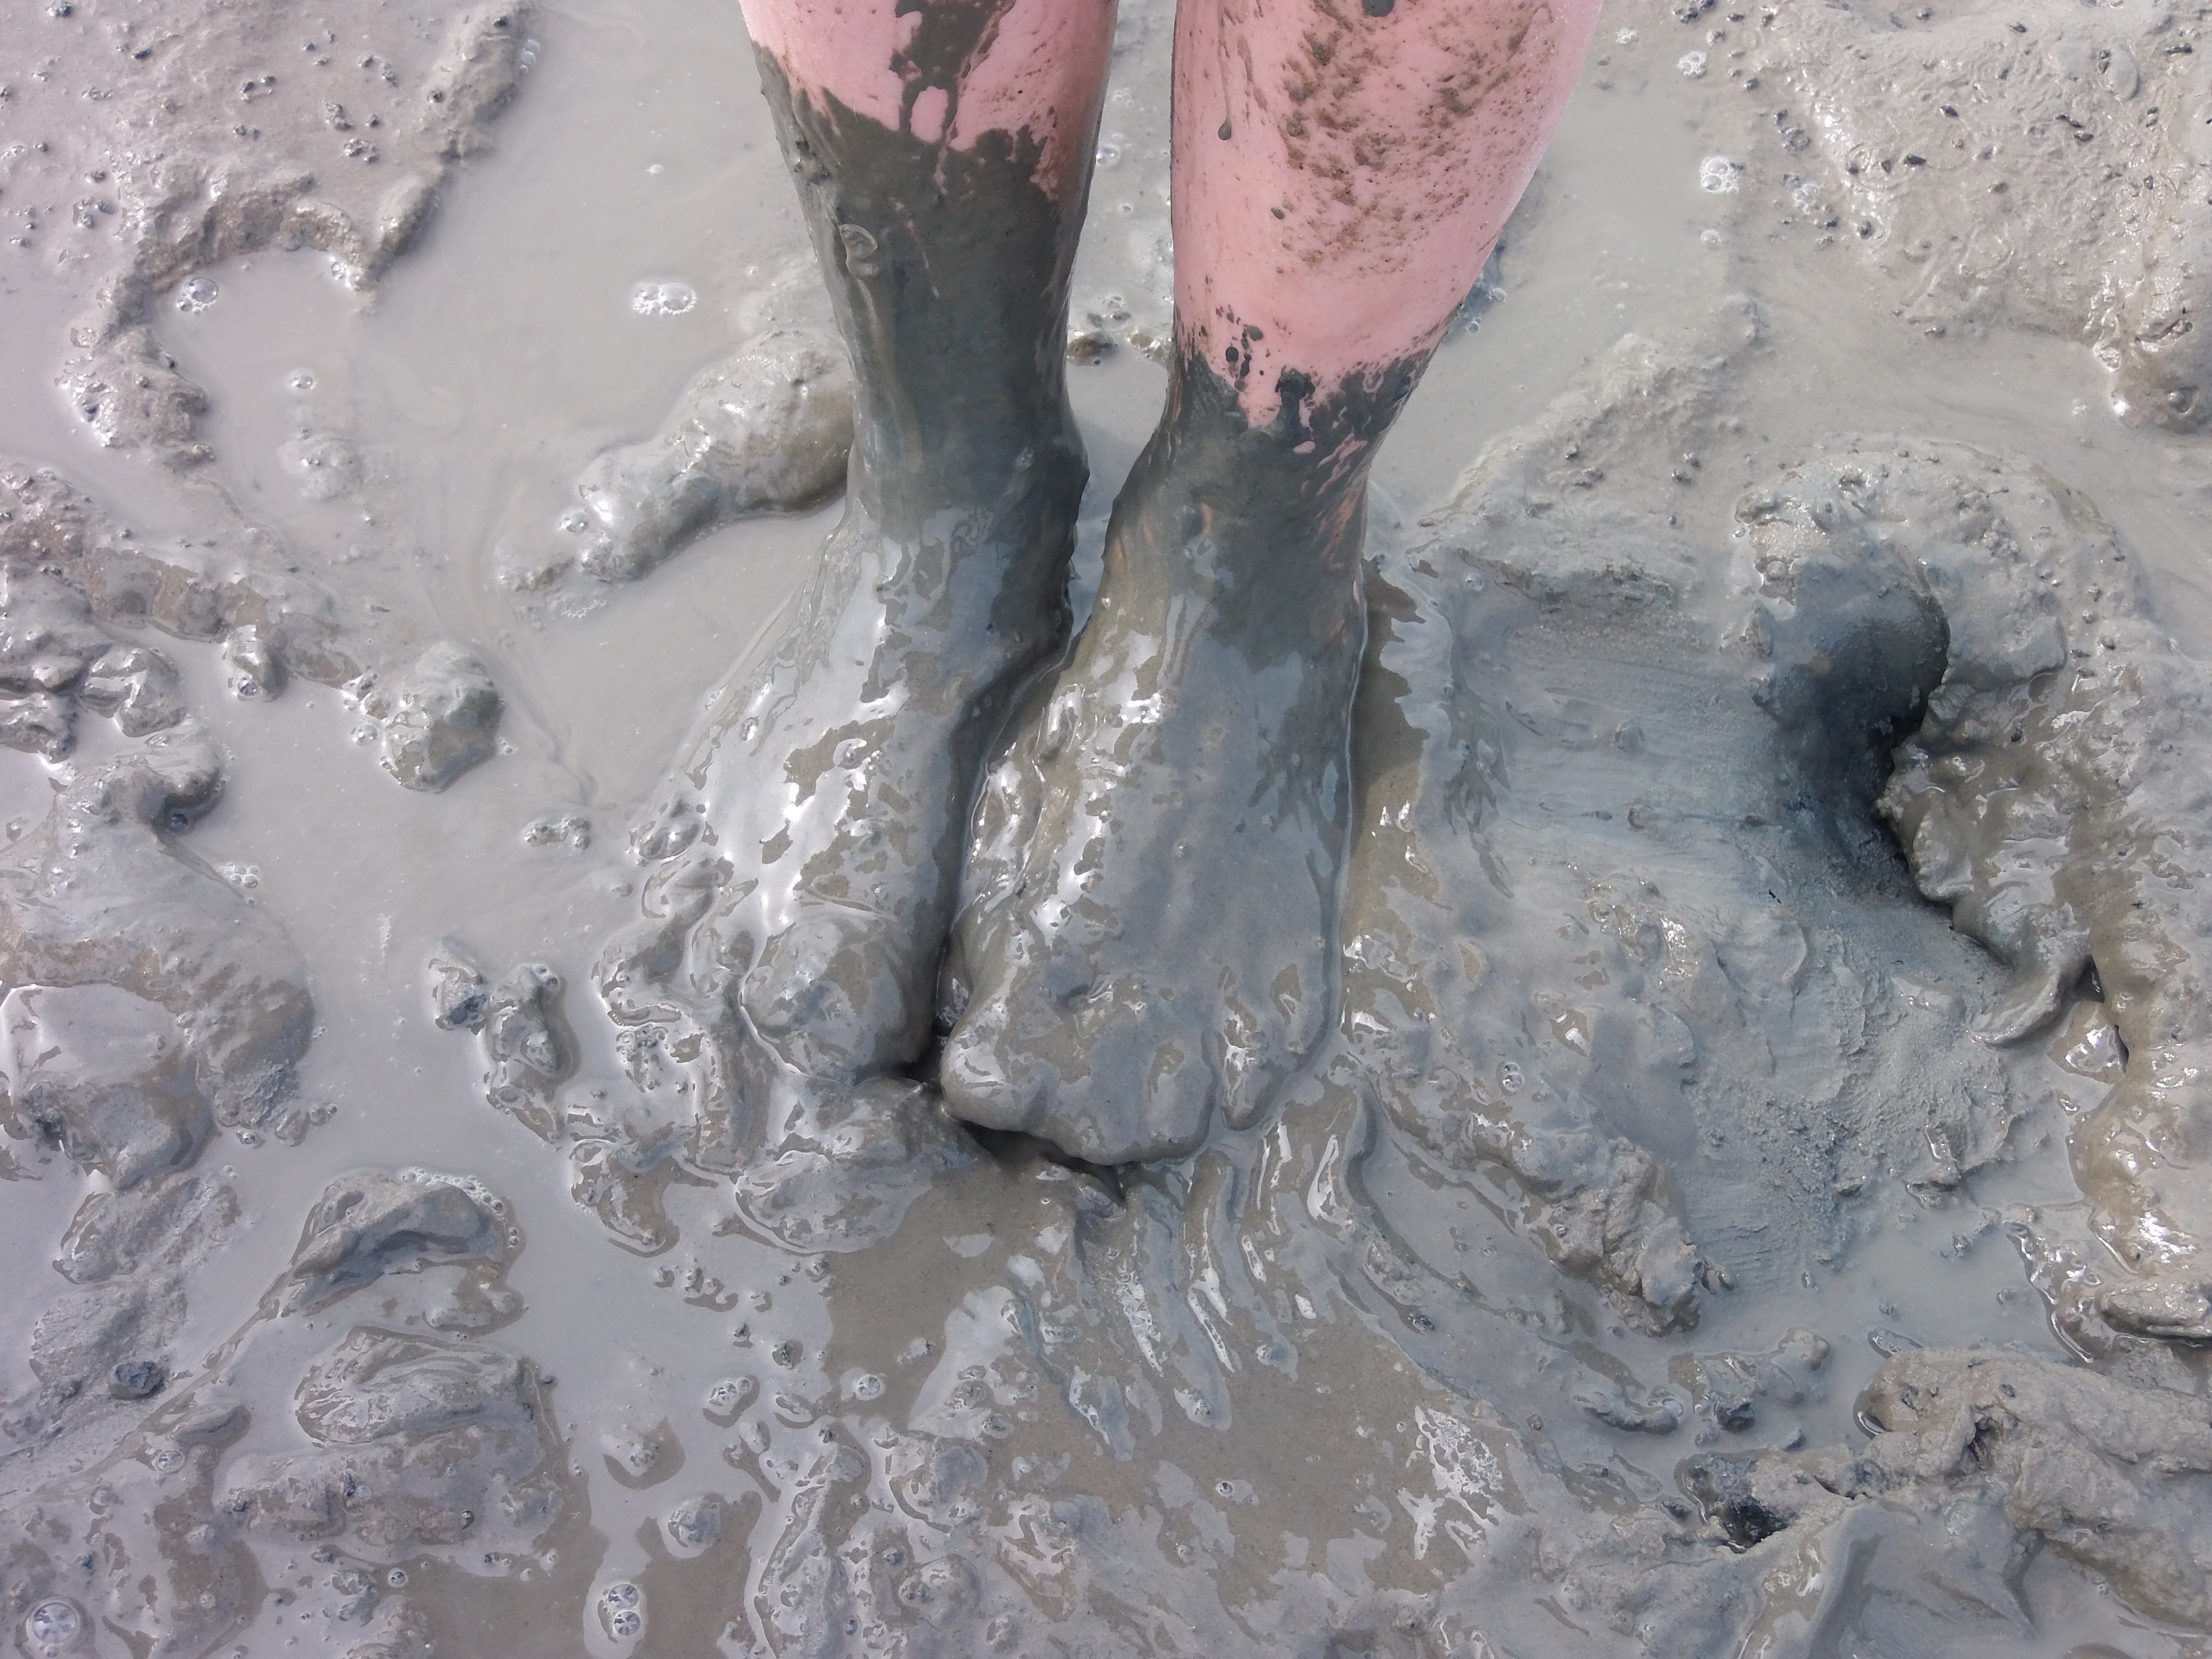 Watts, Dirty, Mud, Foot, Feet, human body part, low section